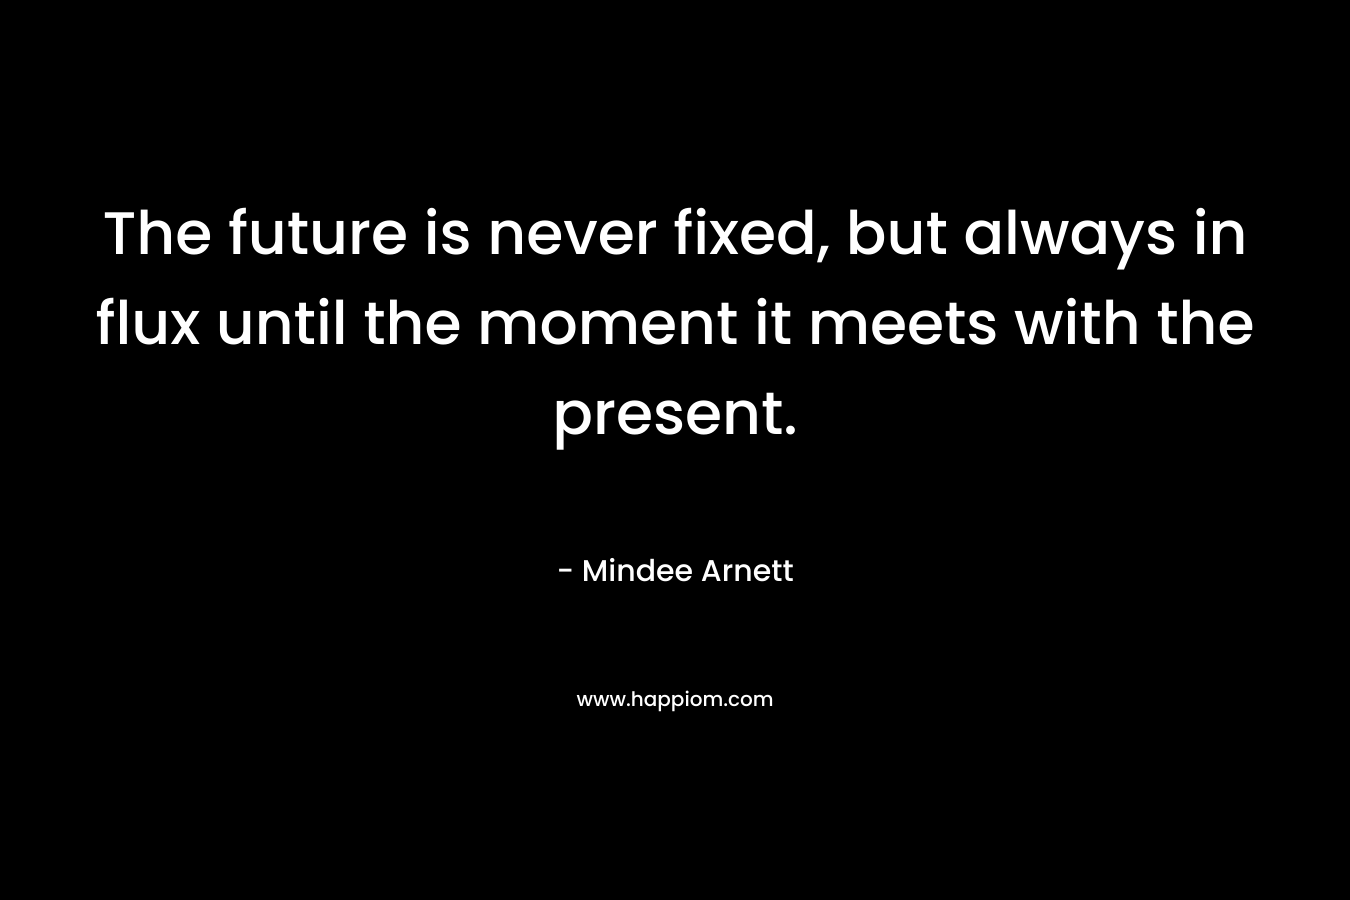 The future is never fixed, but always in flux until the moment it meets with the present. – Mindee Arnett